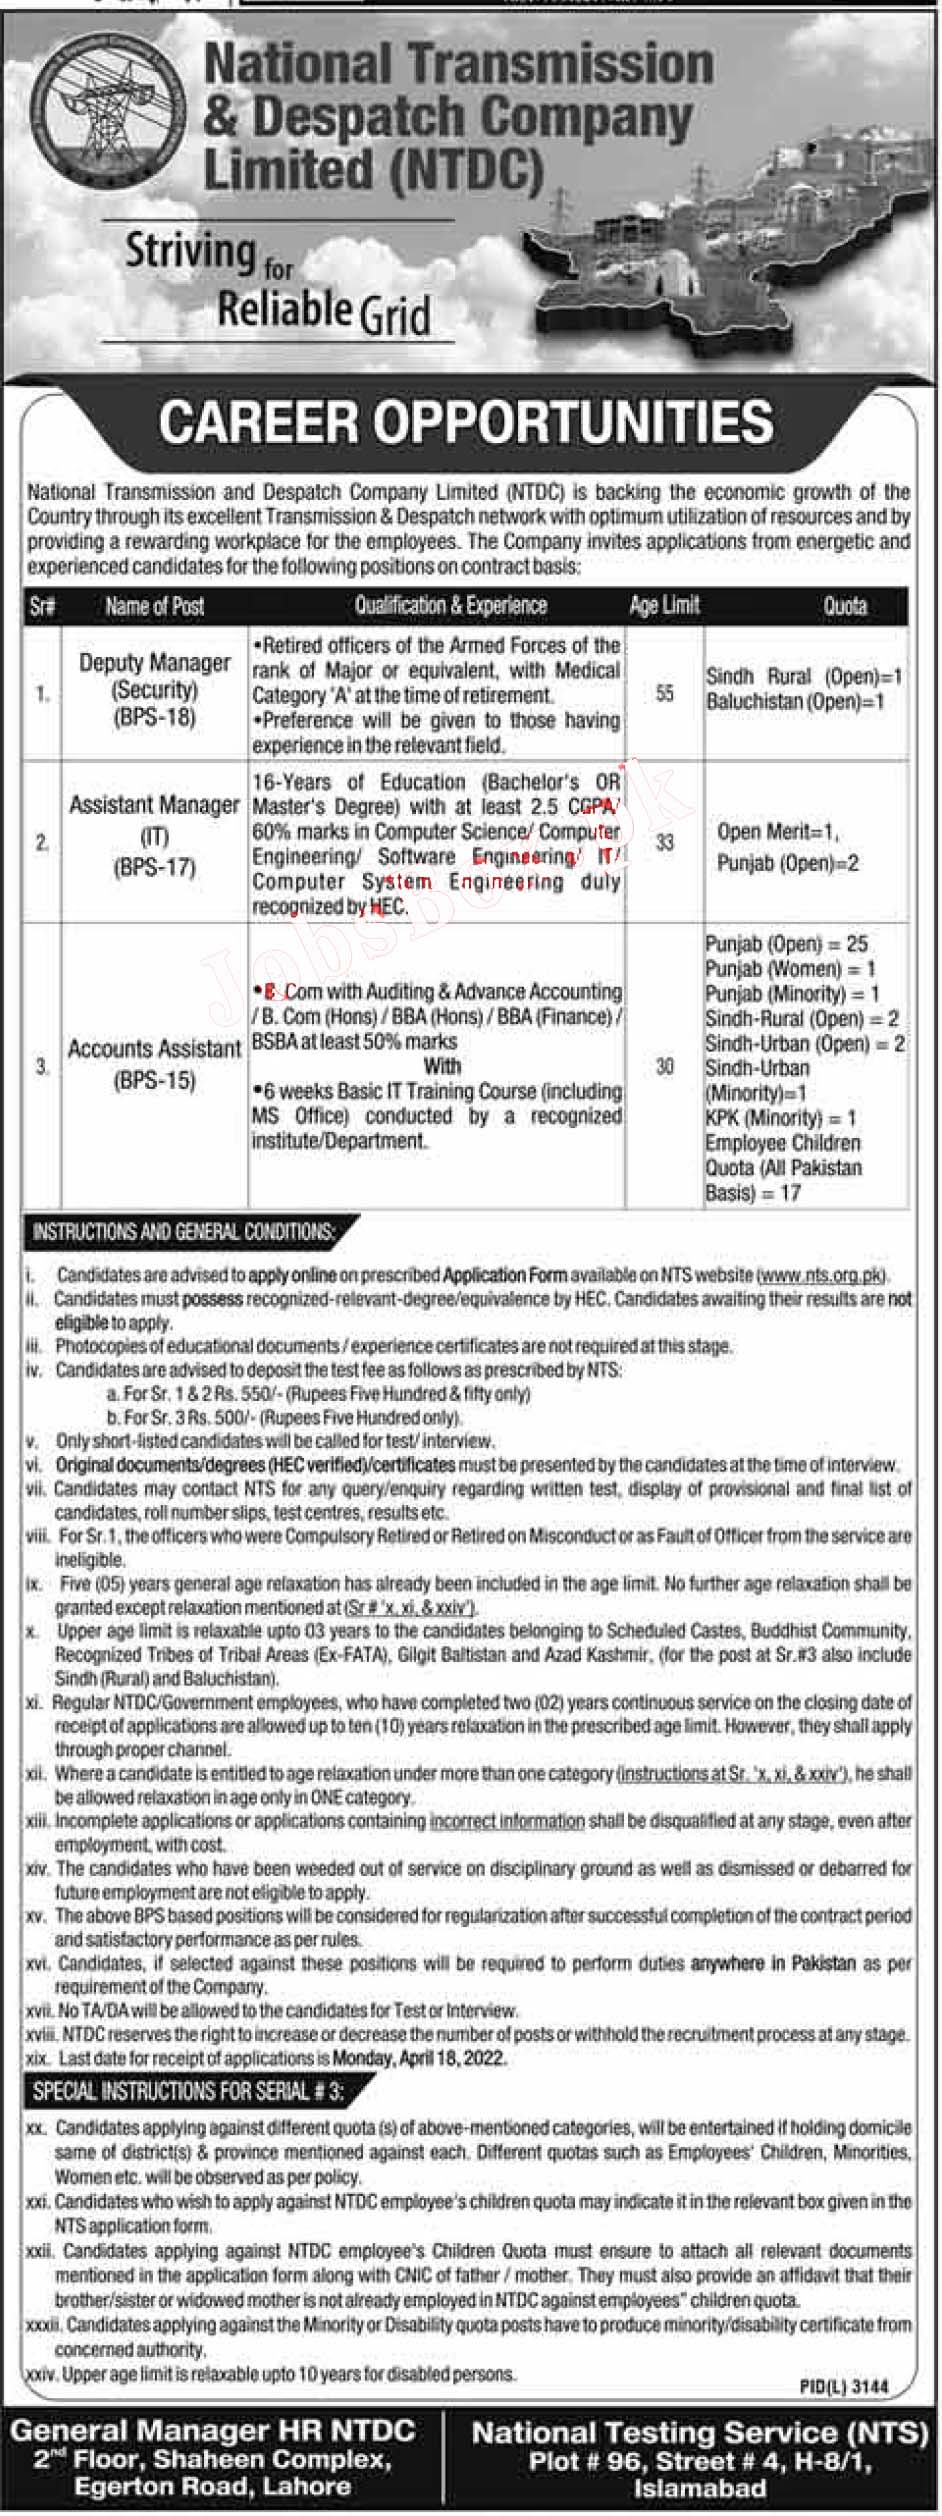 National Transmission and Despatch Company Jobs 2022 – NTDC jobs 2022